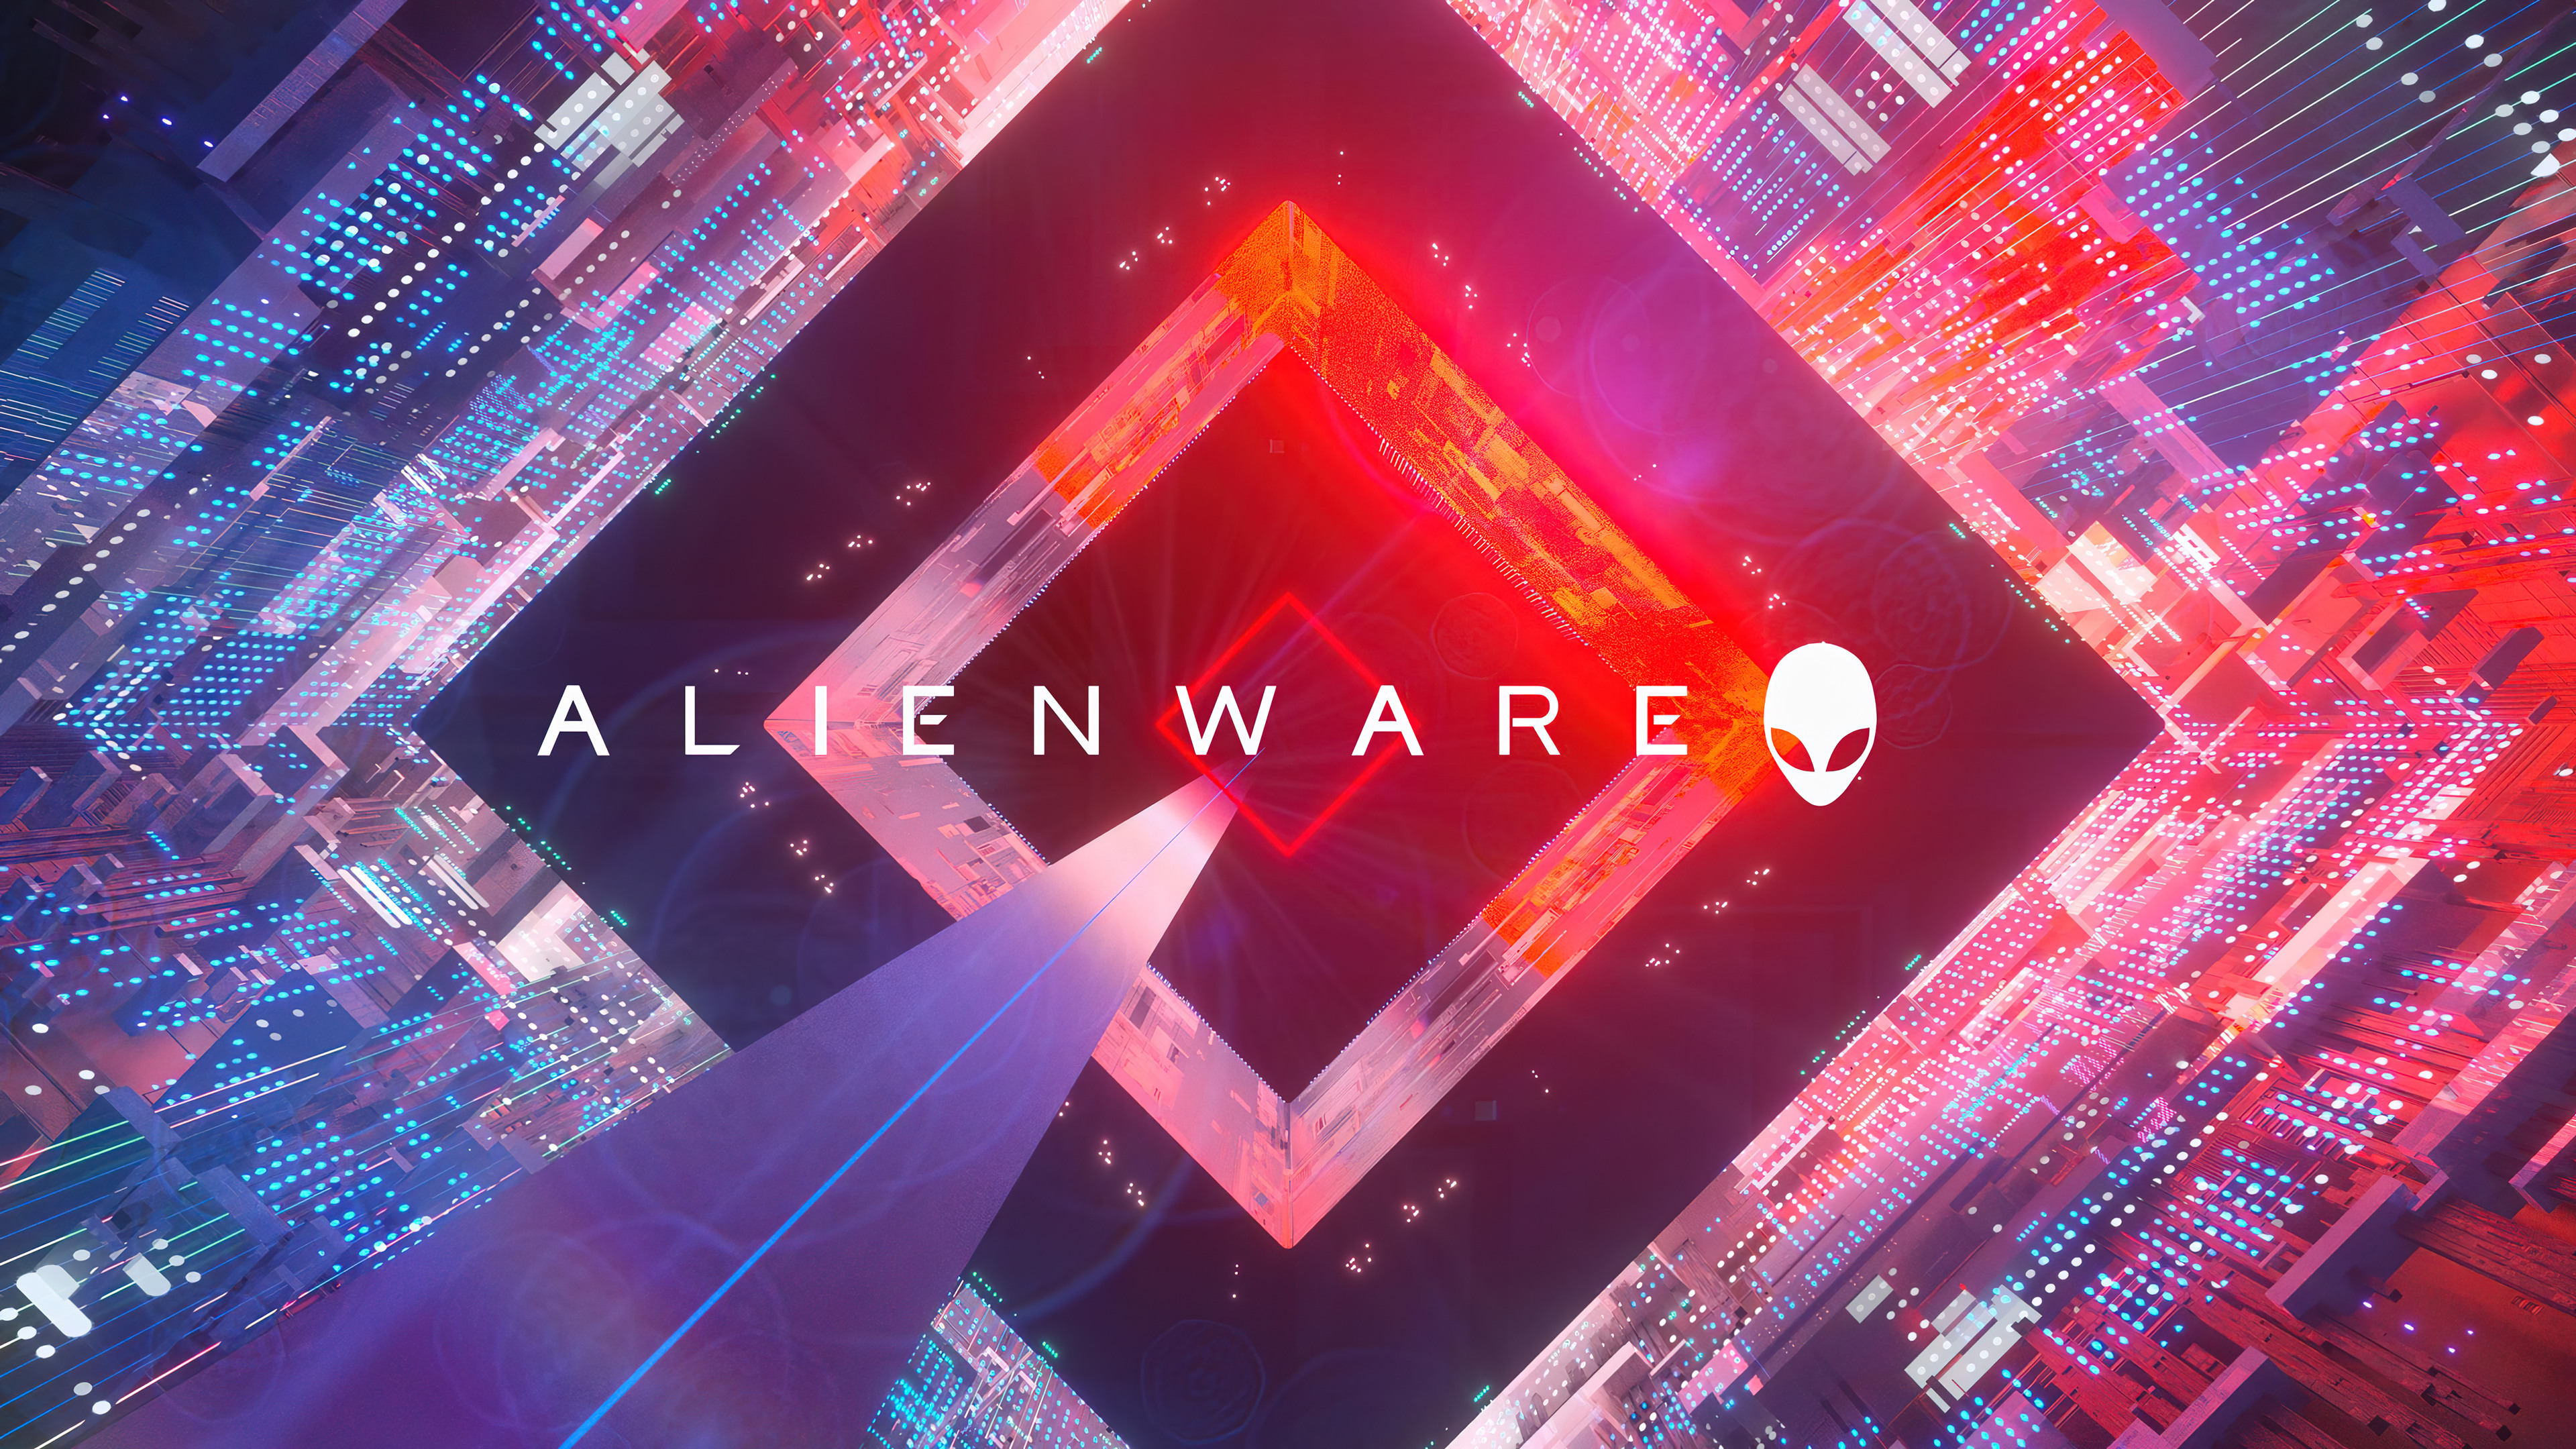 4K Alienware Wallpaper and Background Image